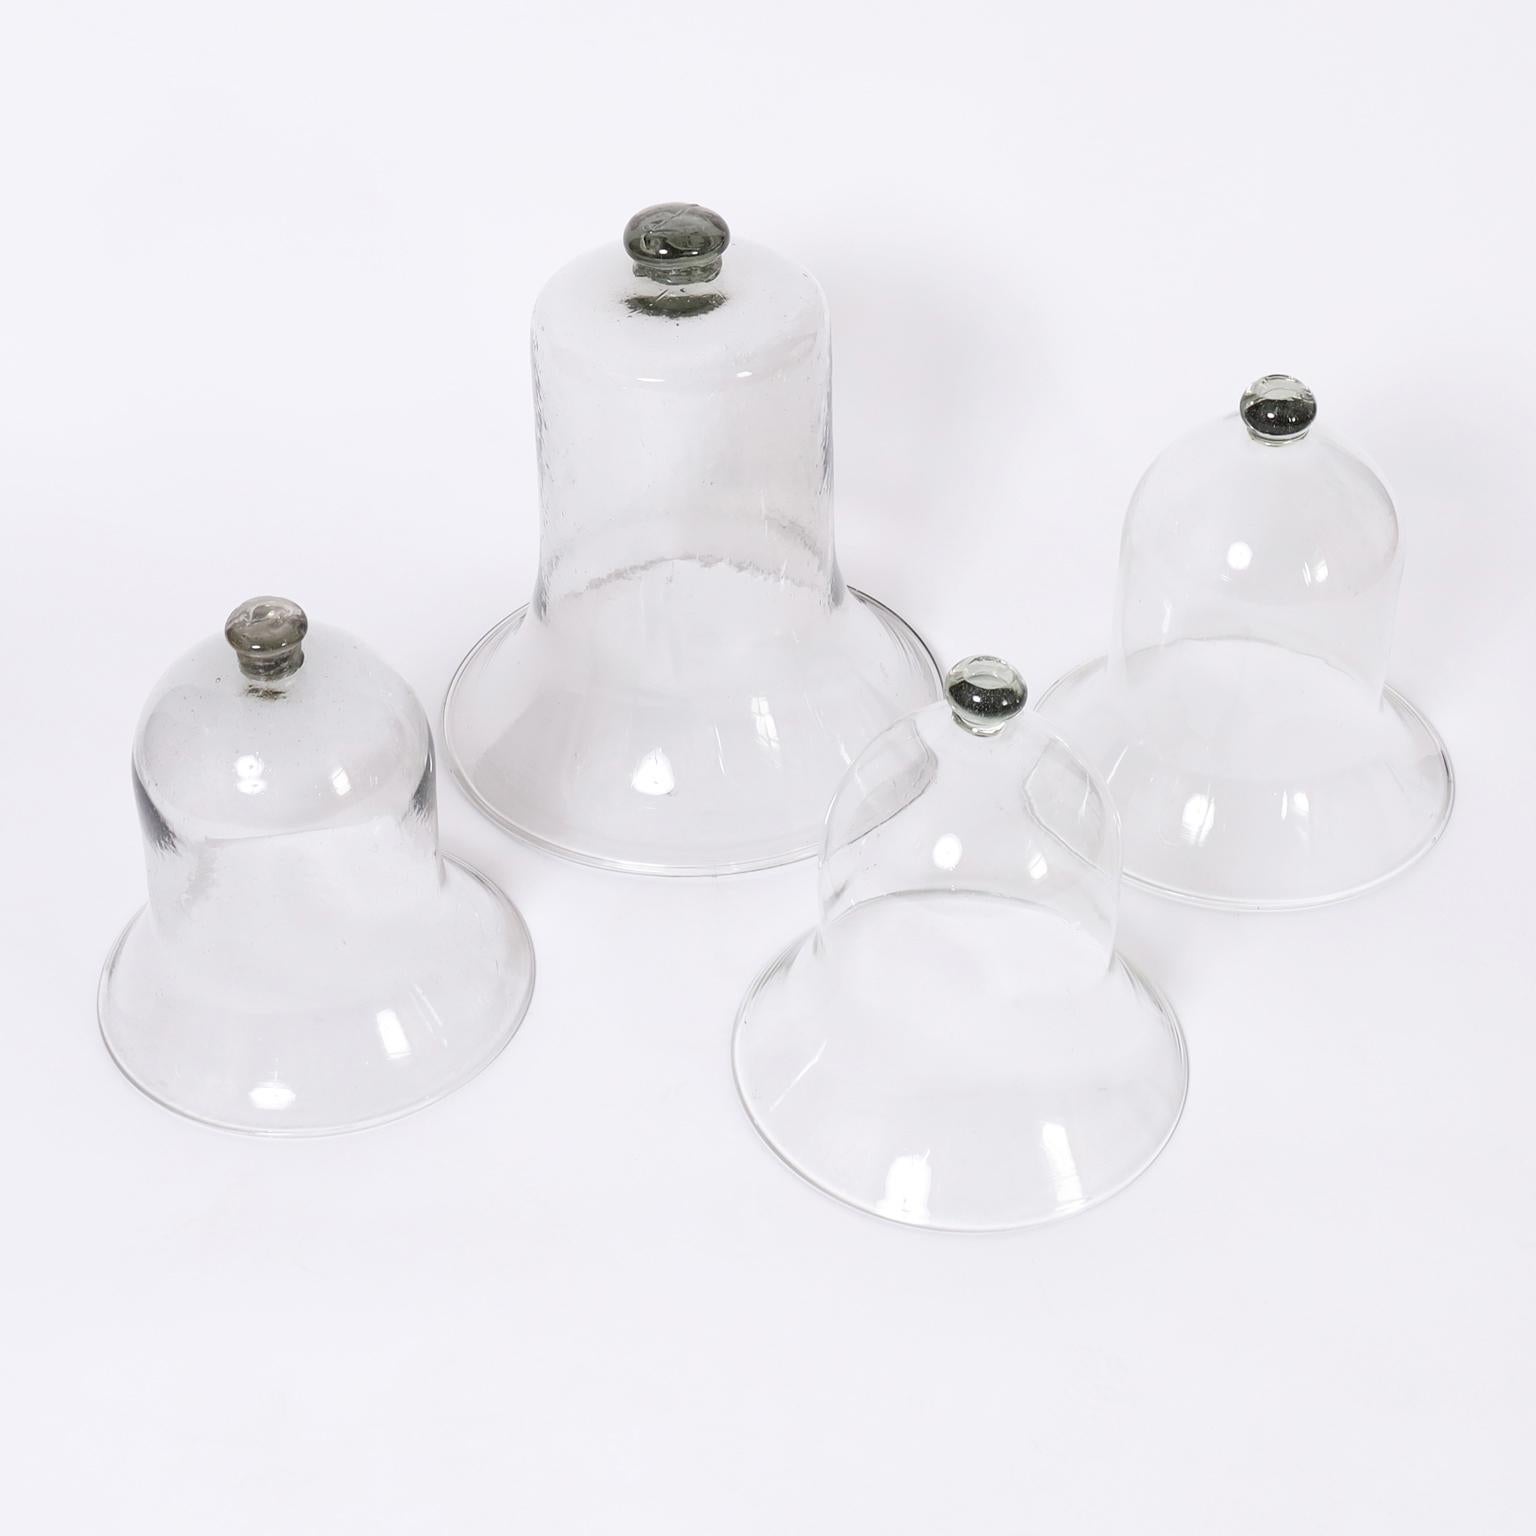 For the gardener with panache, a set of four hand blown glass cloches in classic bell form. Priced Individually.

Left: H: 13 DM: 12 $525.00
Middle: H: 18 DM: 16 $825.00
Right (Pair): H: 14 DM: 13 $1,150.00